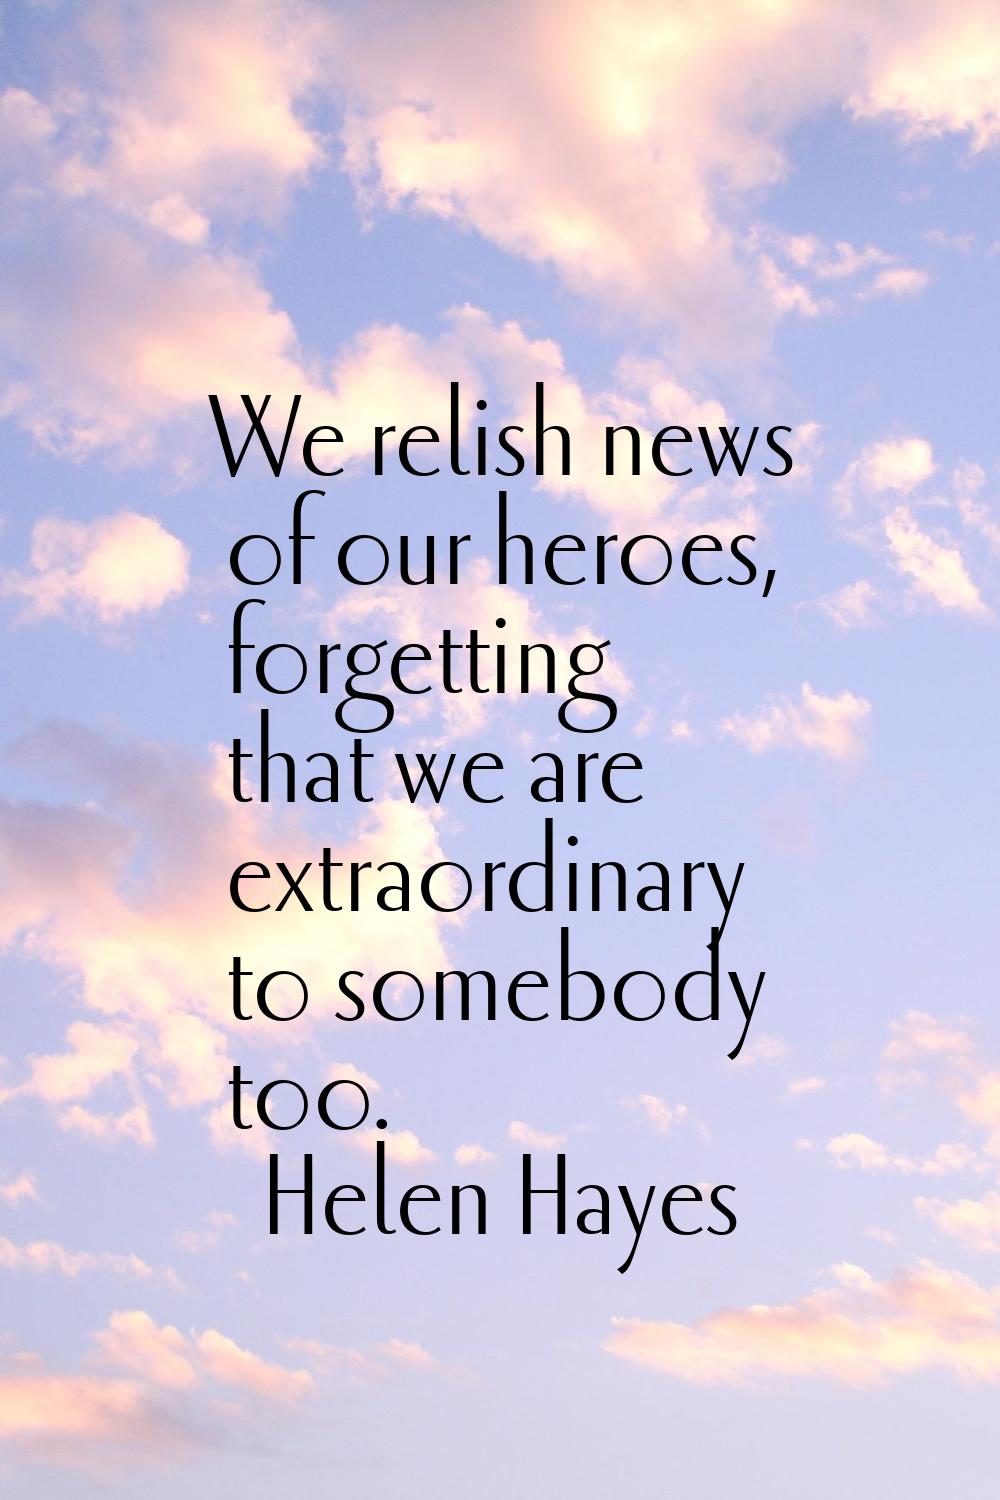 We relish news of our heroes, forgetting that we are extraordinary to somebody too.